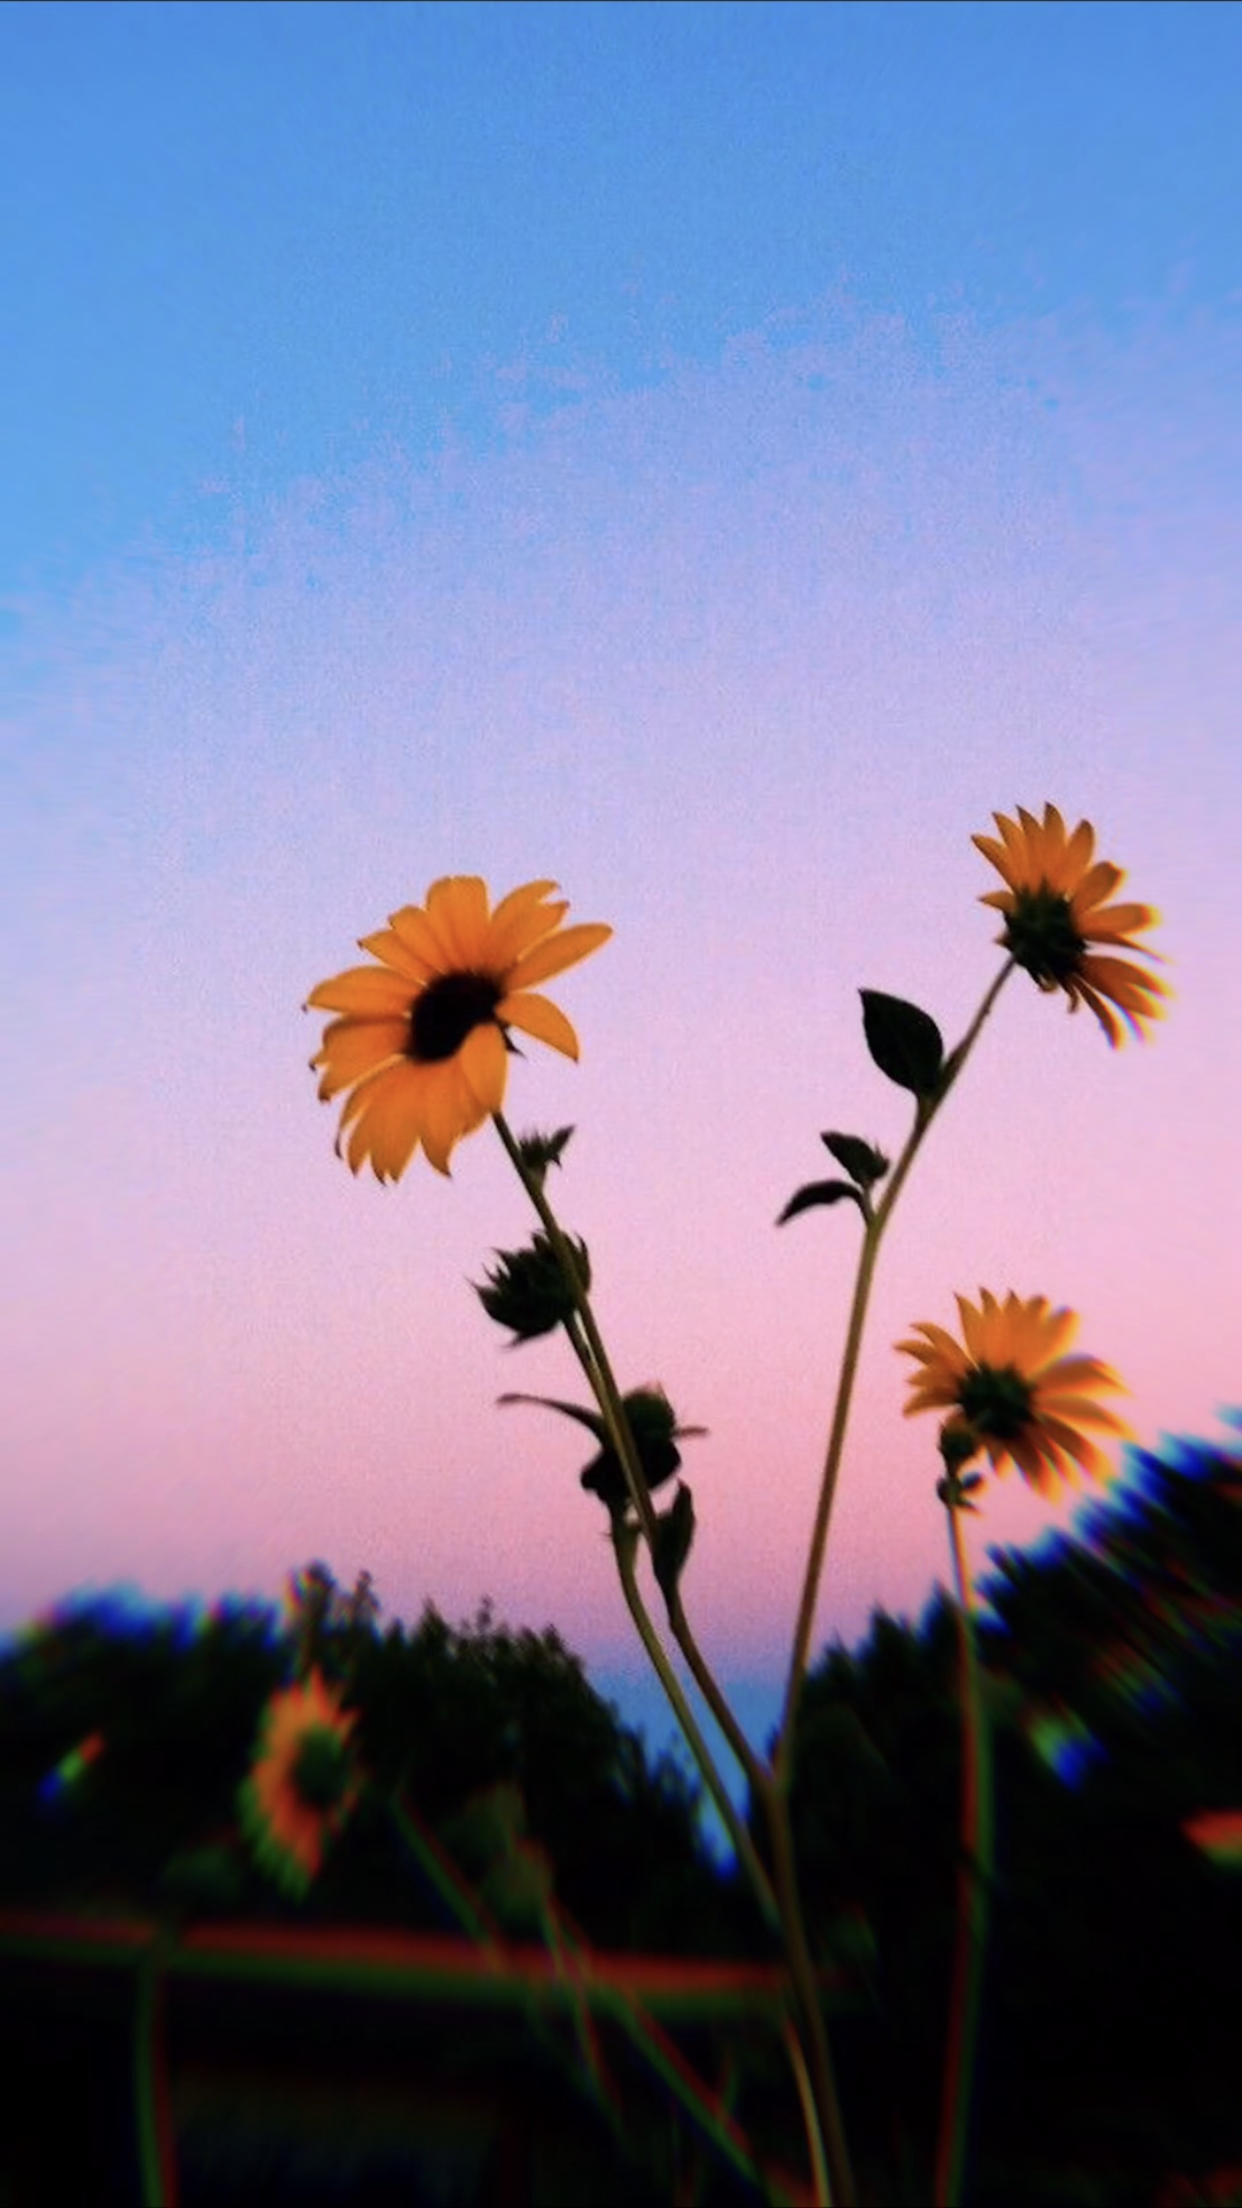 Free download aesthetic wallpaper With image [1242x2208] for your Desktop, Mobile & Tablet. Explore Clouds Sunflower Aesthetic Wallpaper. Clouds Sunflower Aesthetic Wallpaper, Sunflower Wallpaper, Sunflower Background